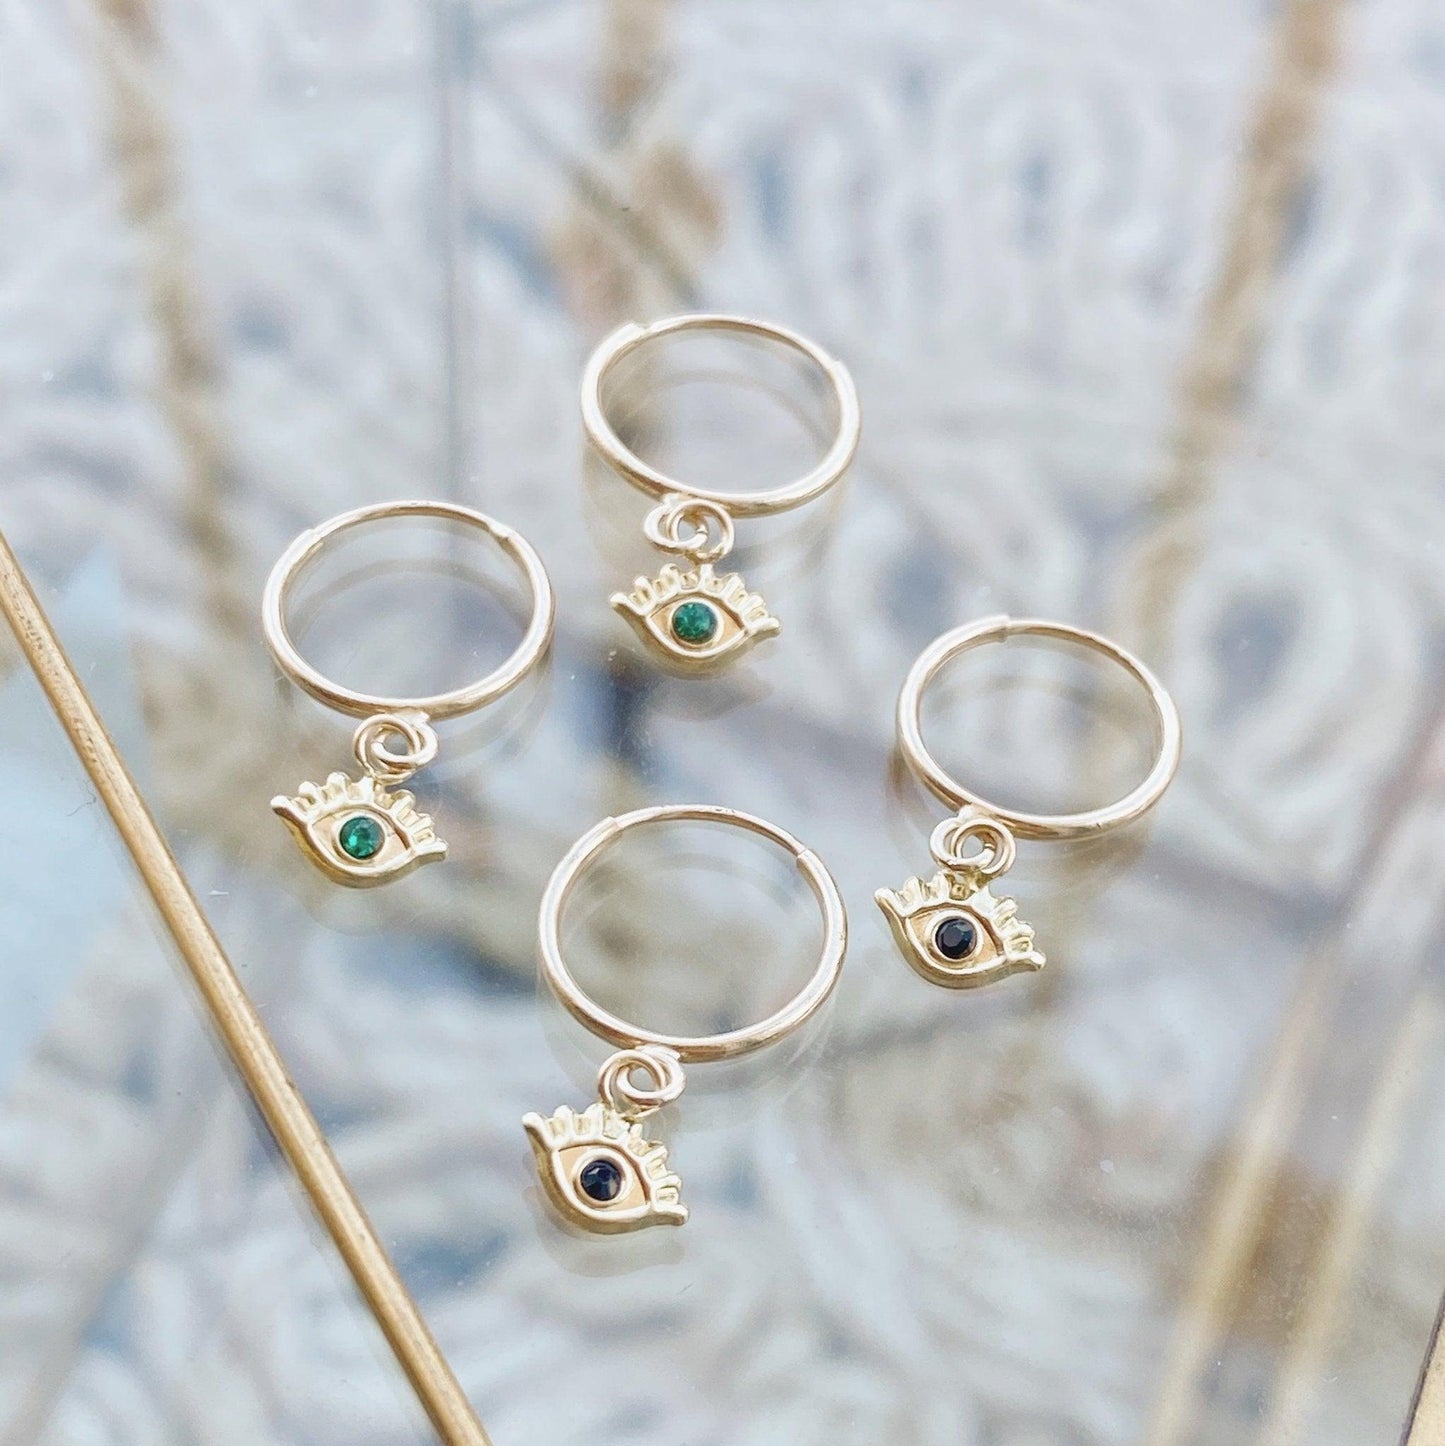 These versatile huggie hoops are delicate and perfect for stacking with other jewelry or wearing alone. They have a rounded back so they will not irritate your skin, unlike other cartilage earrings that have ridges. This makes them perfect for every day wear!